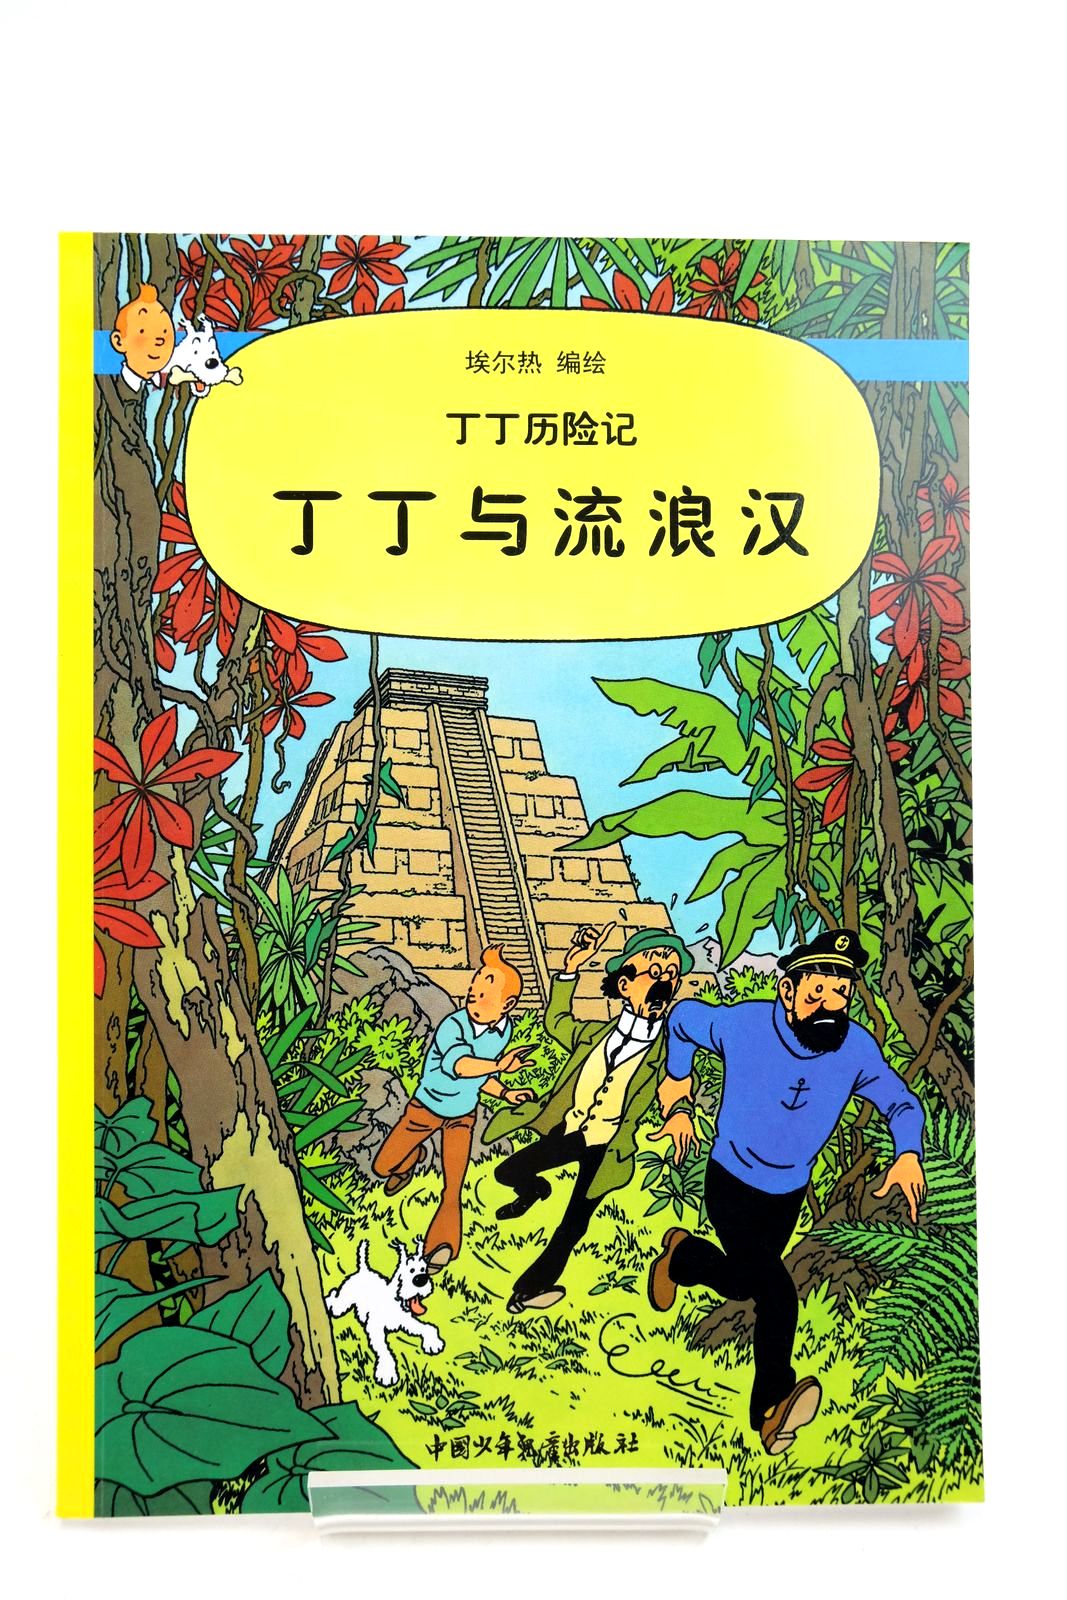 Photo of THE ADVENTURES OF TINTIN: TINTIN AND THE PICAROS (CHINESE LANGUAGE EDITION) written by Herge, illustrated by Herge, published by China Press (STOCK CODE: 2140355)  for sale by Stella & Rose's Books